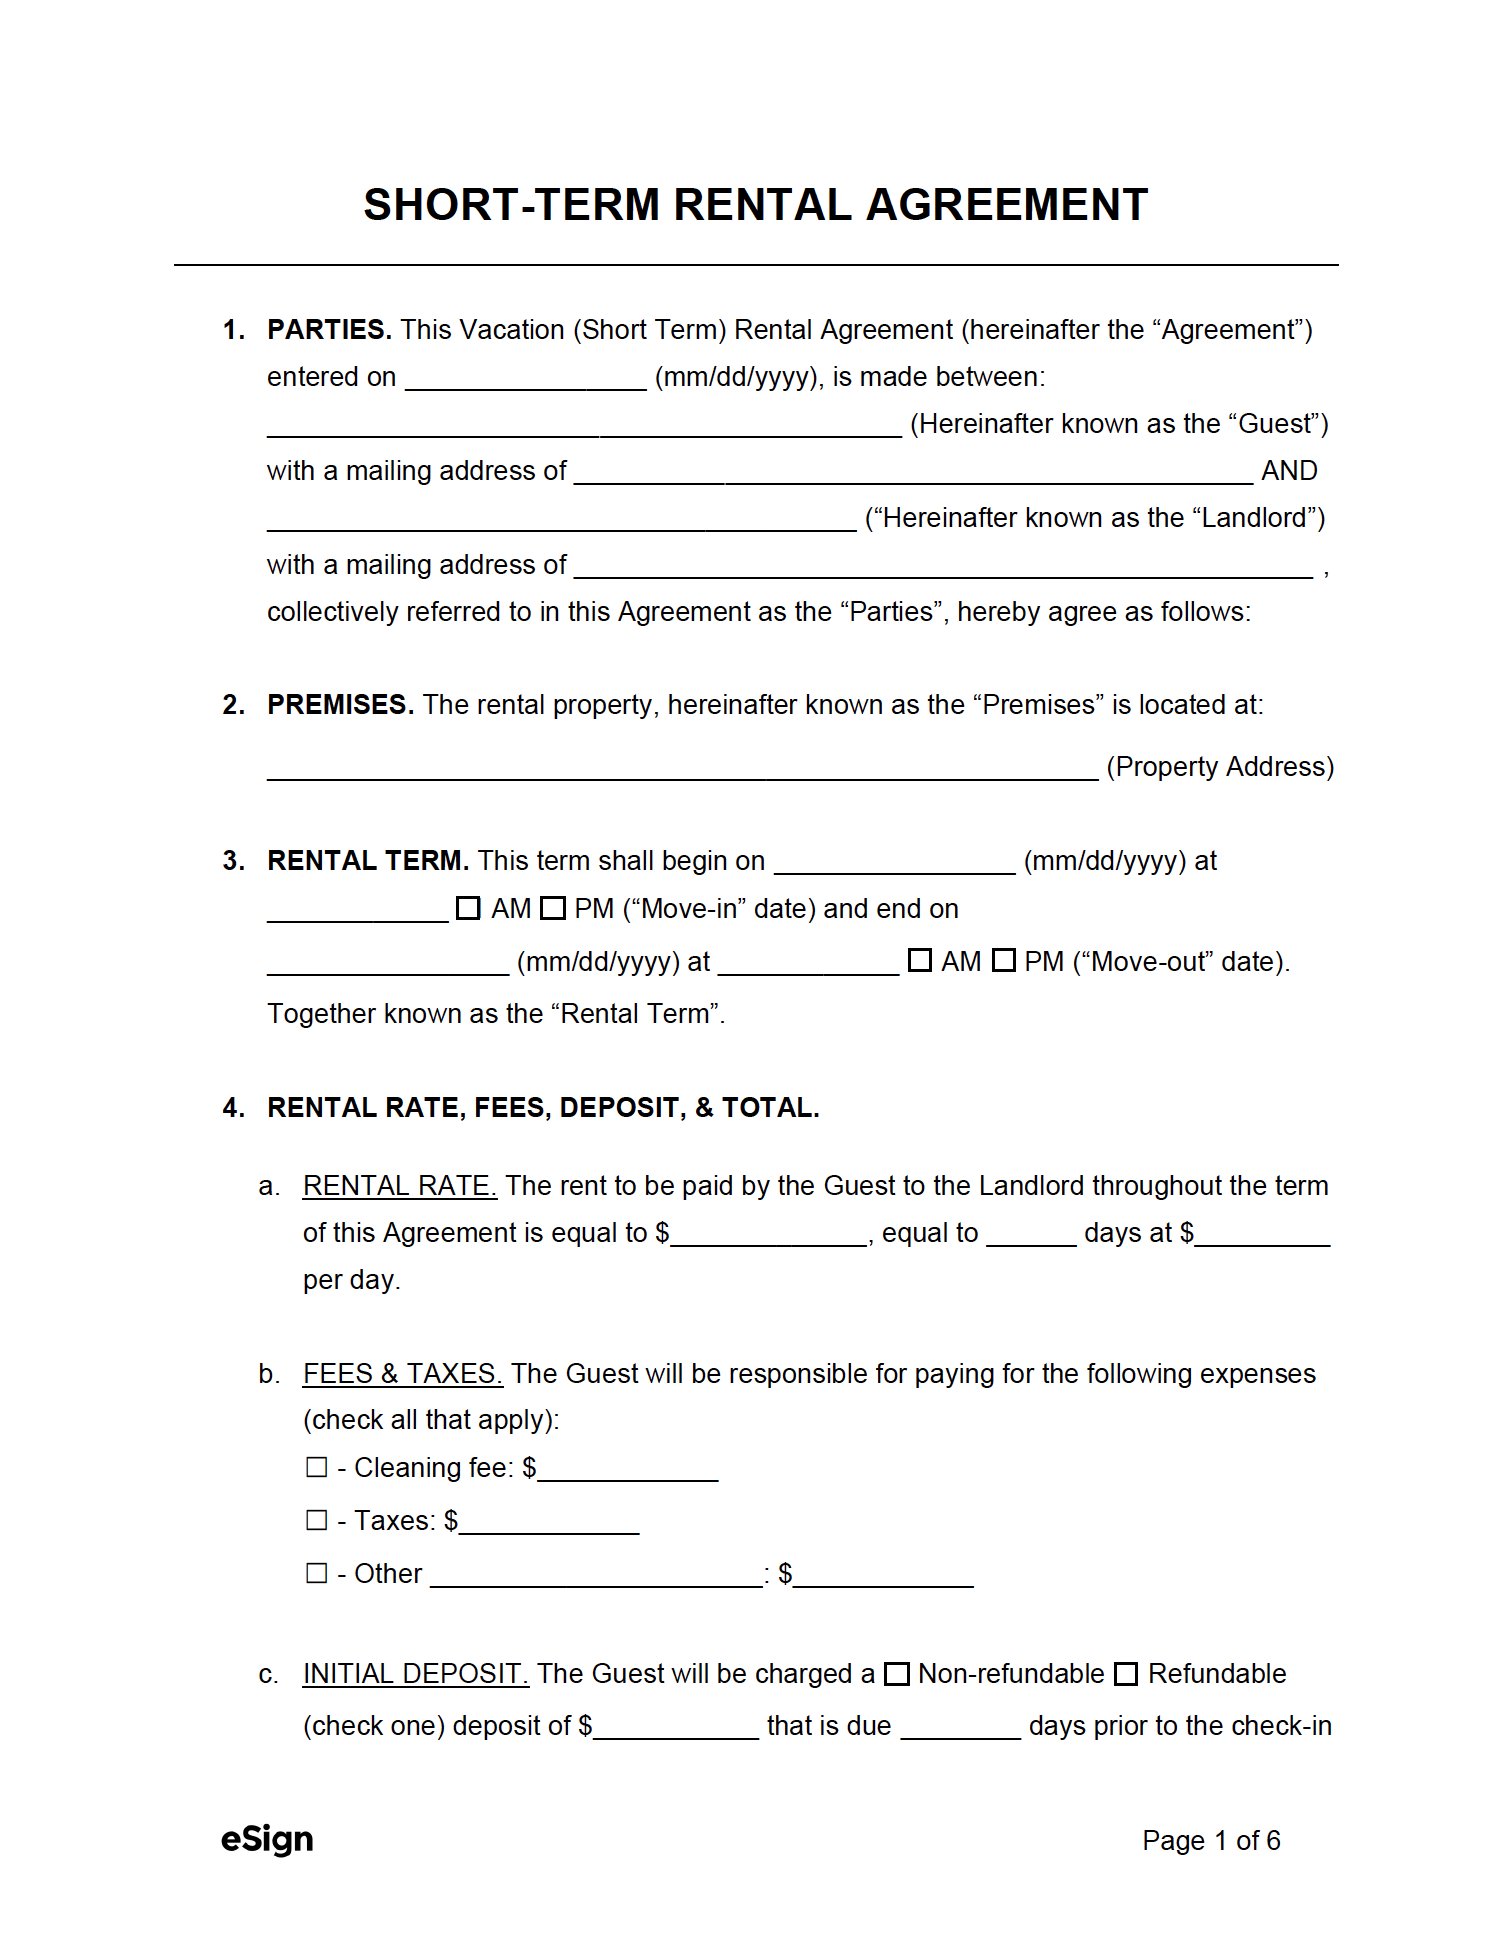 Free Short-term / Vacation Lease Agreement - PDF  Word Pertaining To short term vacation rental agreement template